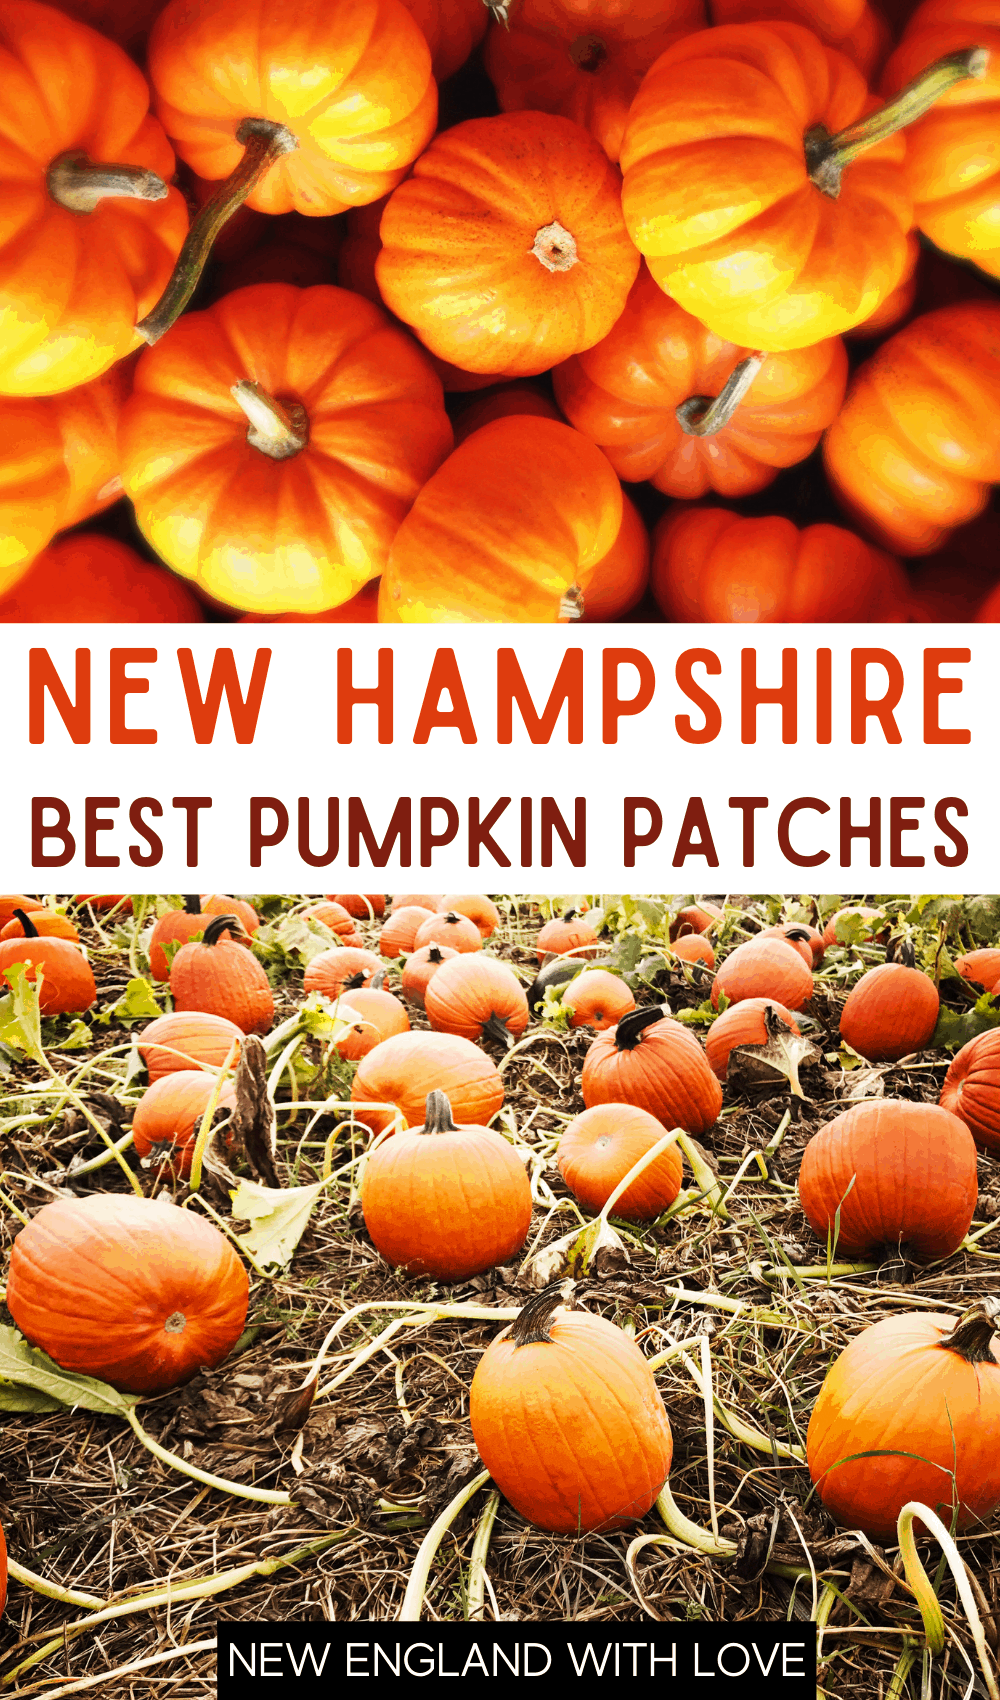 Pinterest graphic reading "NEW HAMPSHIRE BEST PUMPKIN PATCHES"